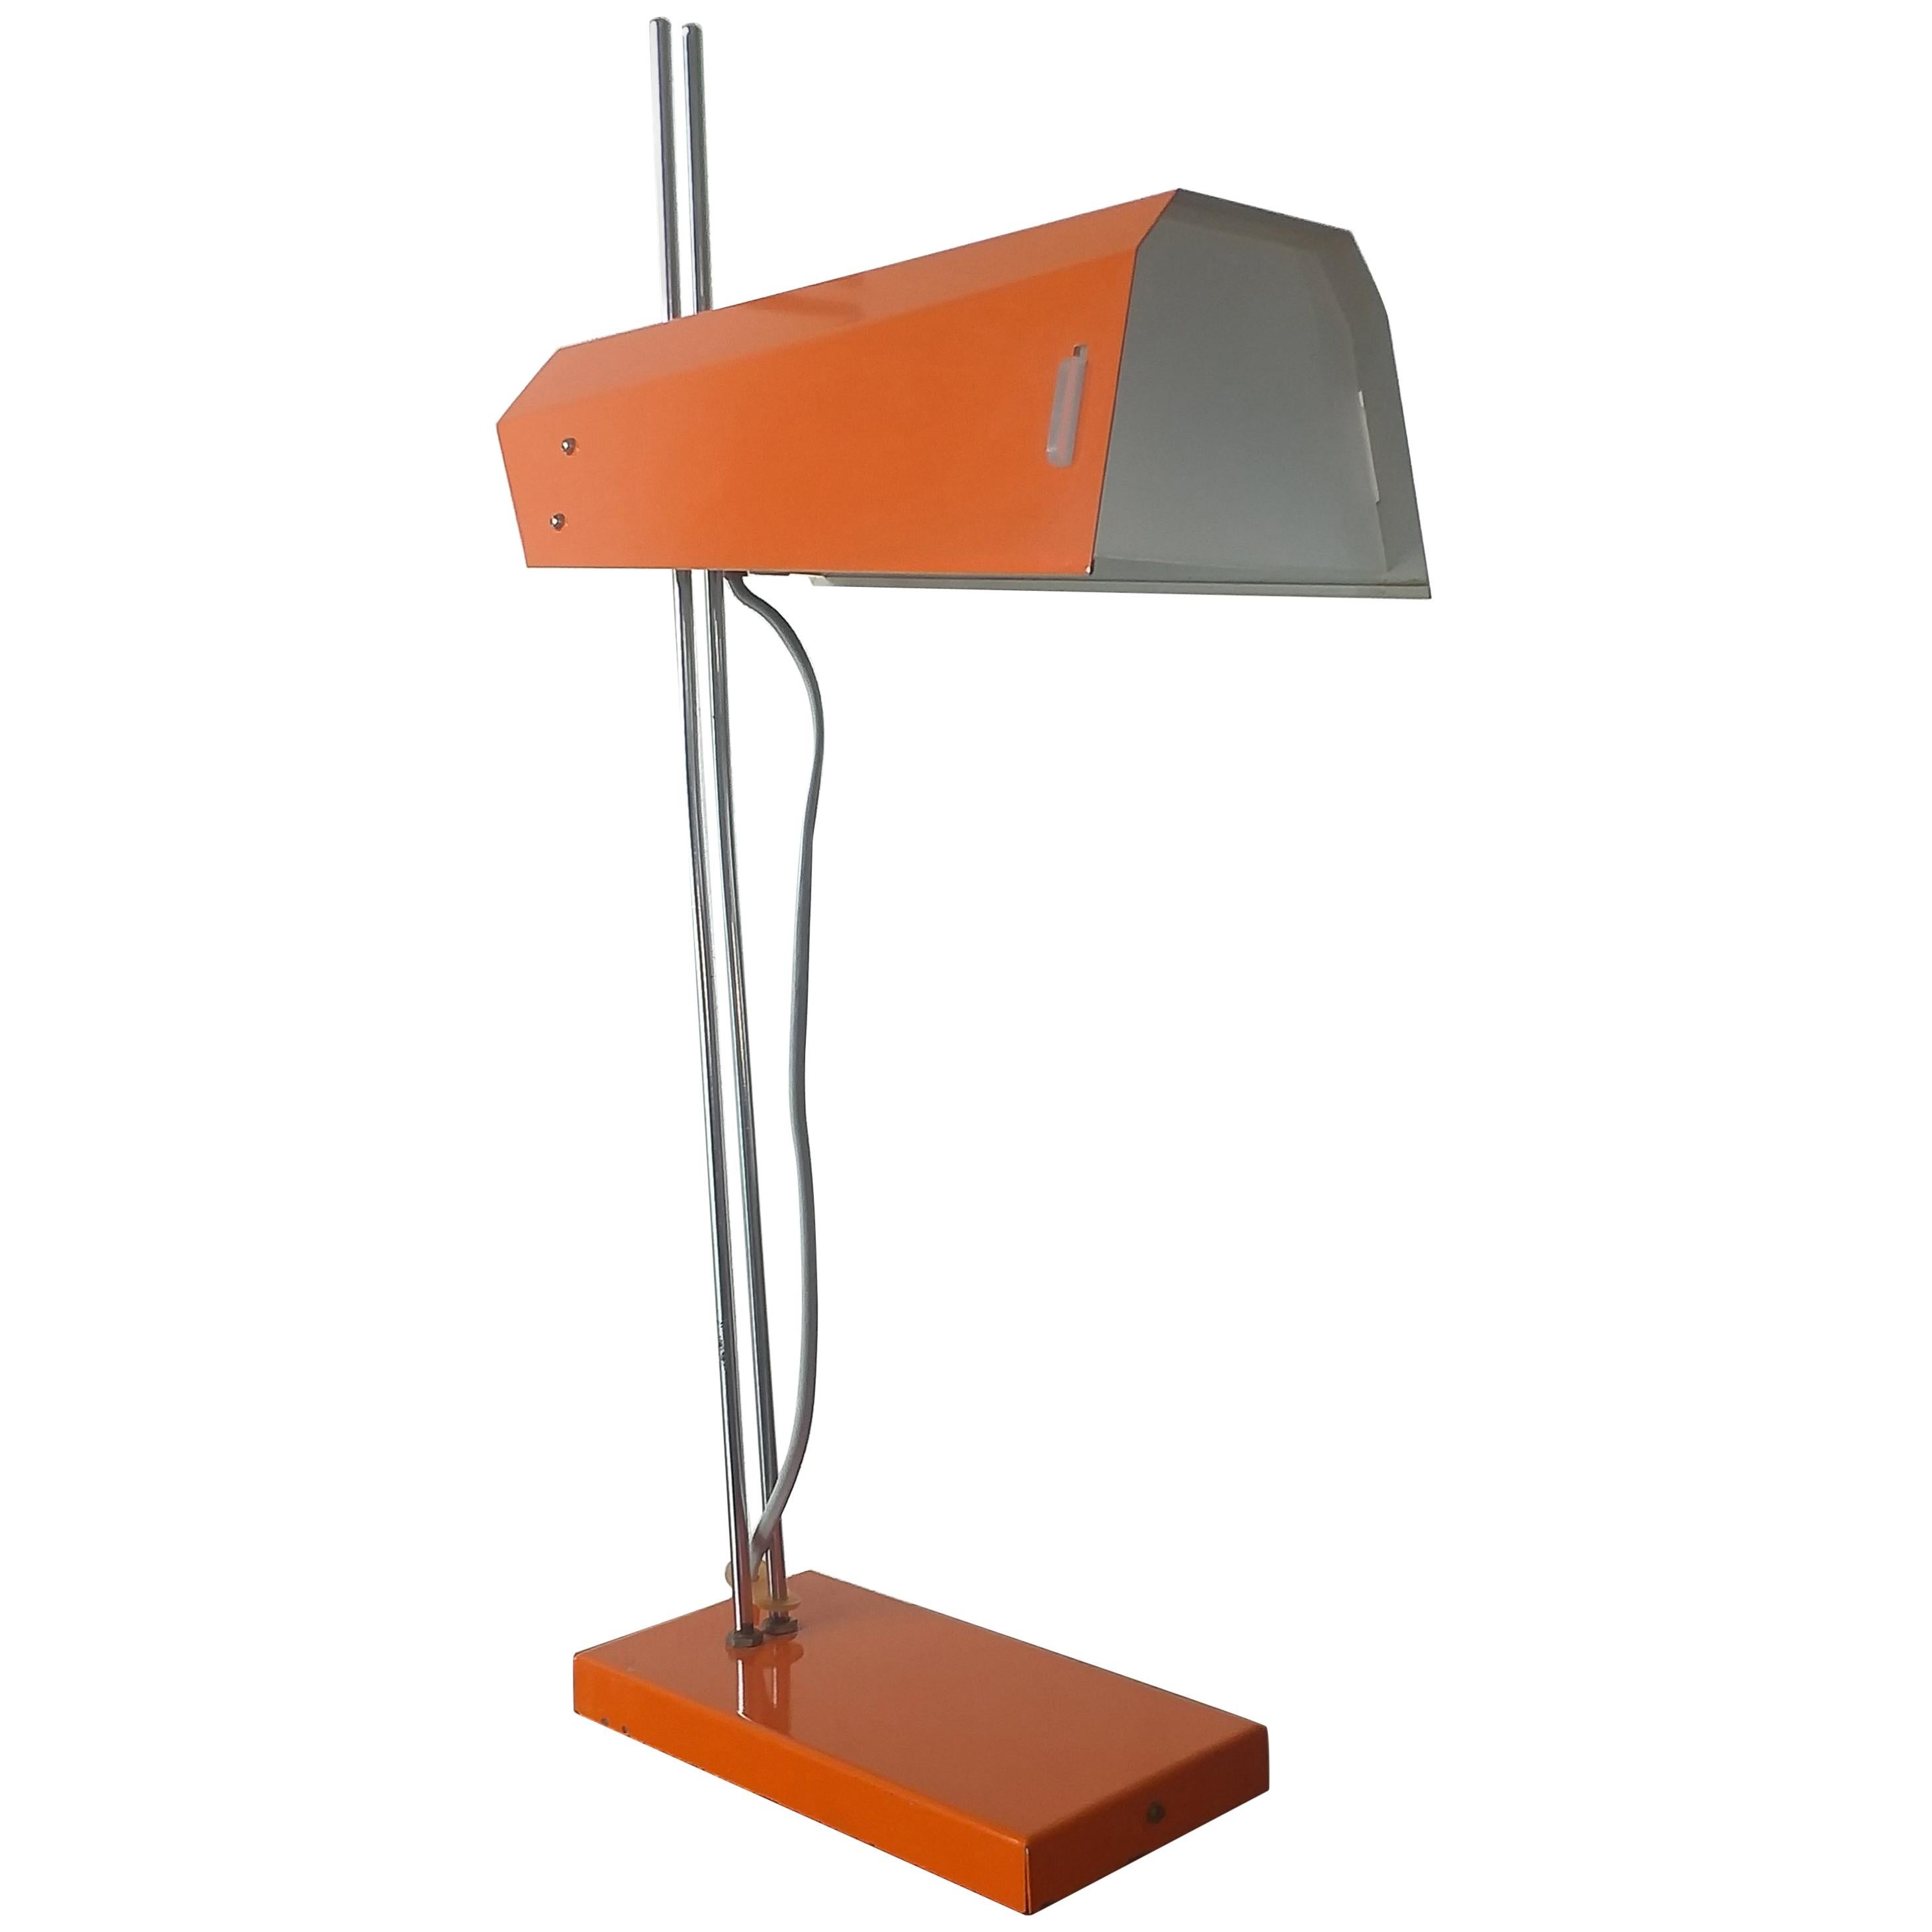 Midcentury Table Lamp Lidokov Designed by Josef Hurka, 1970s For Sale